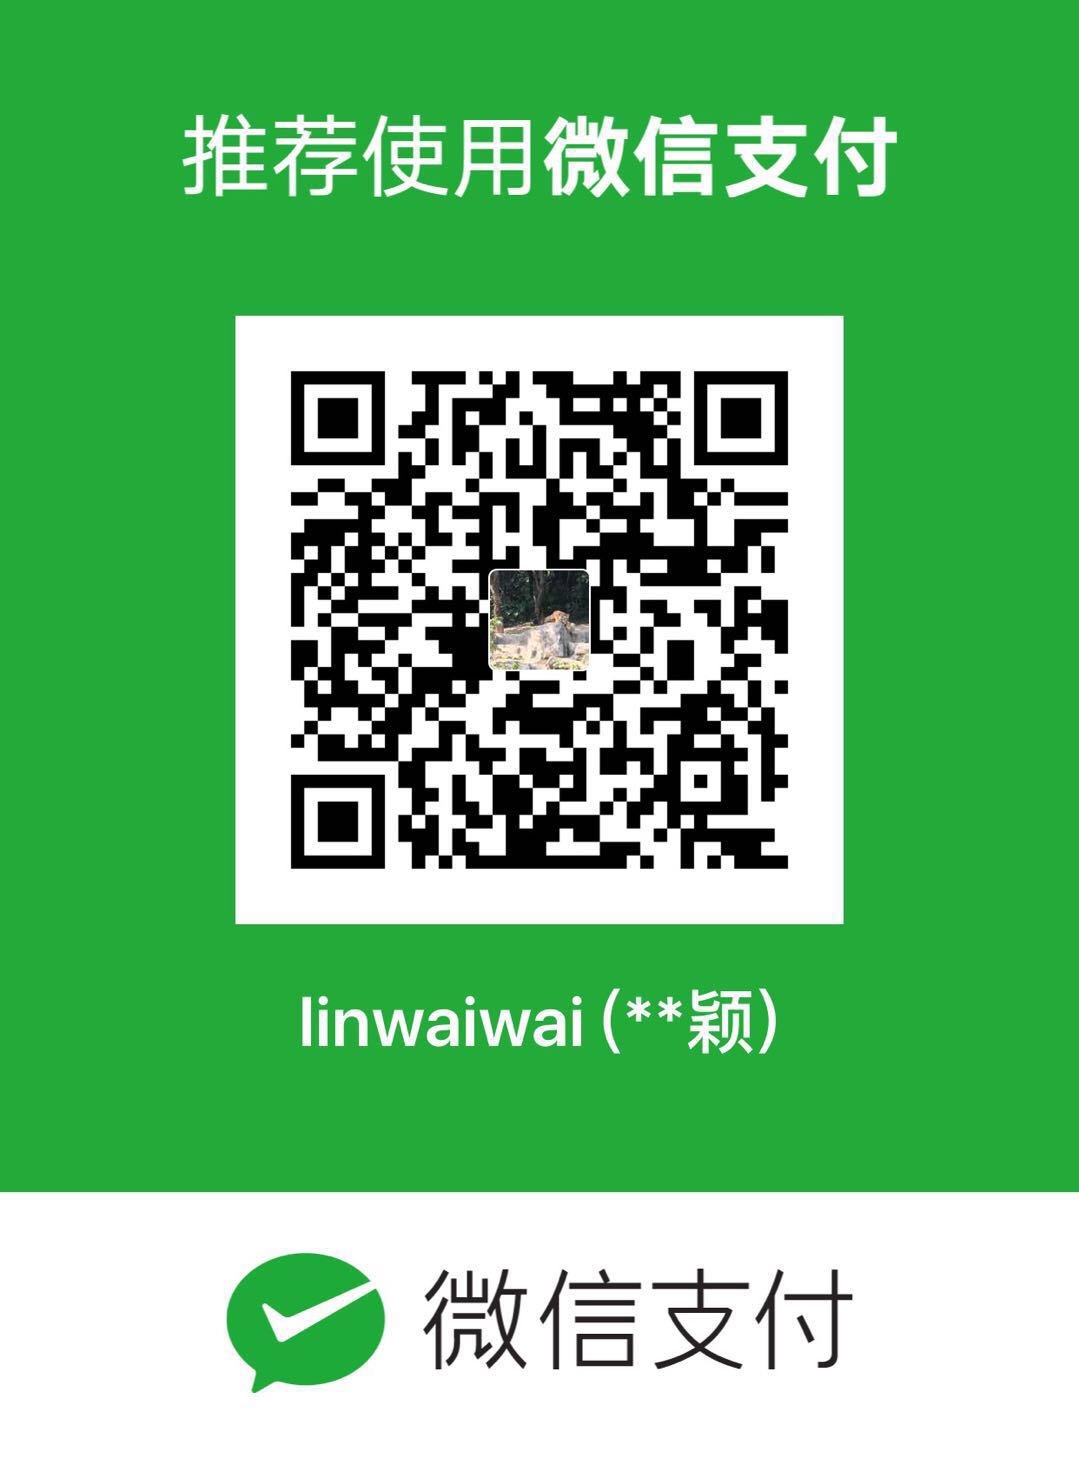 Donate with Alipay or Wechat Pay